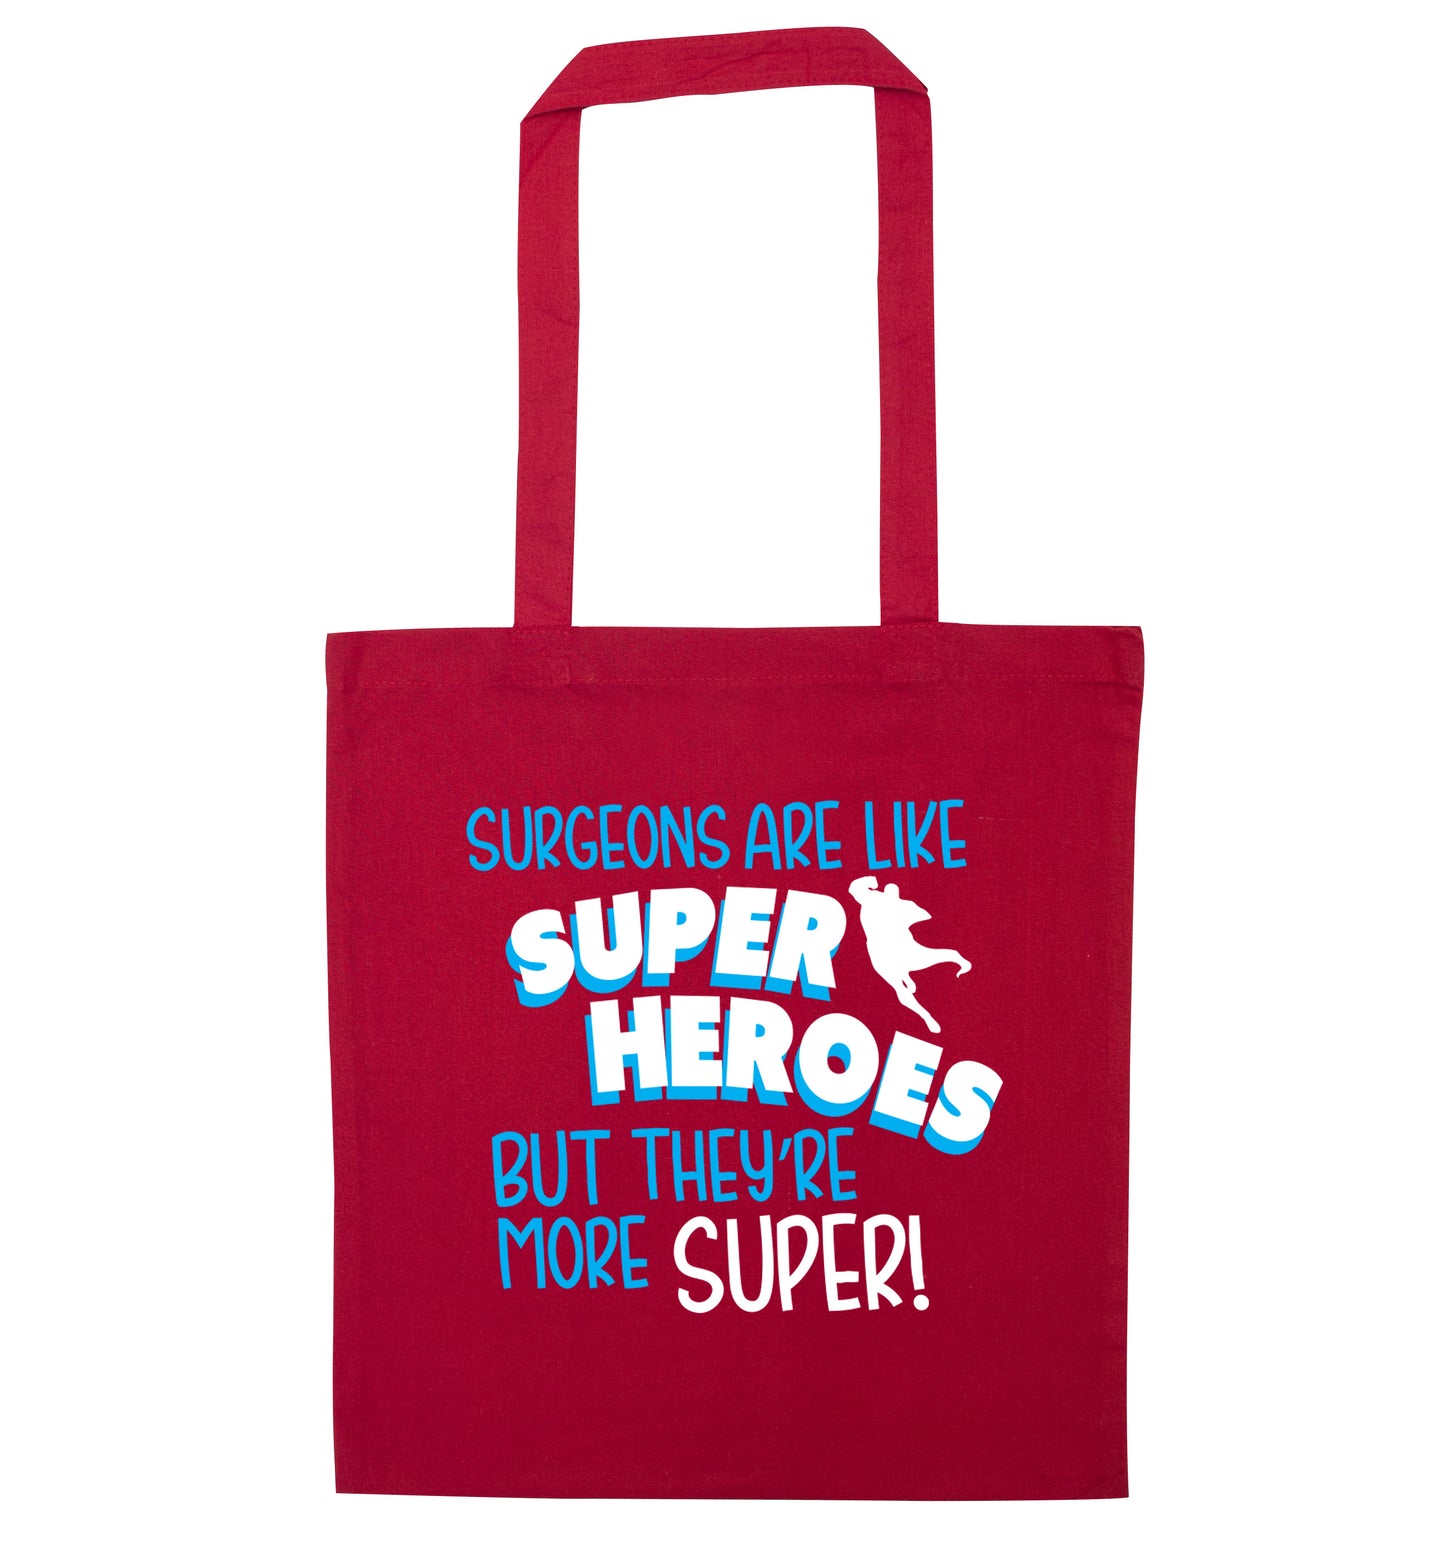 Surgeons are like superheros but they're more super red tote bag